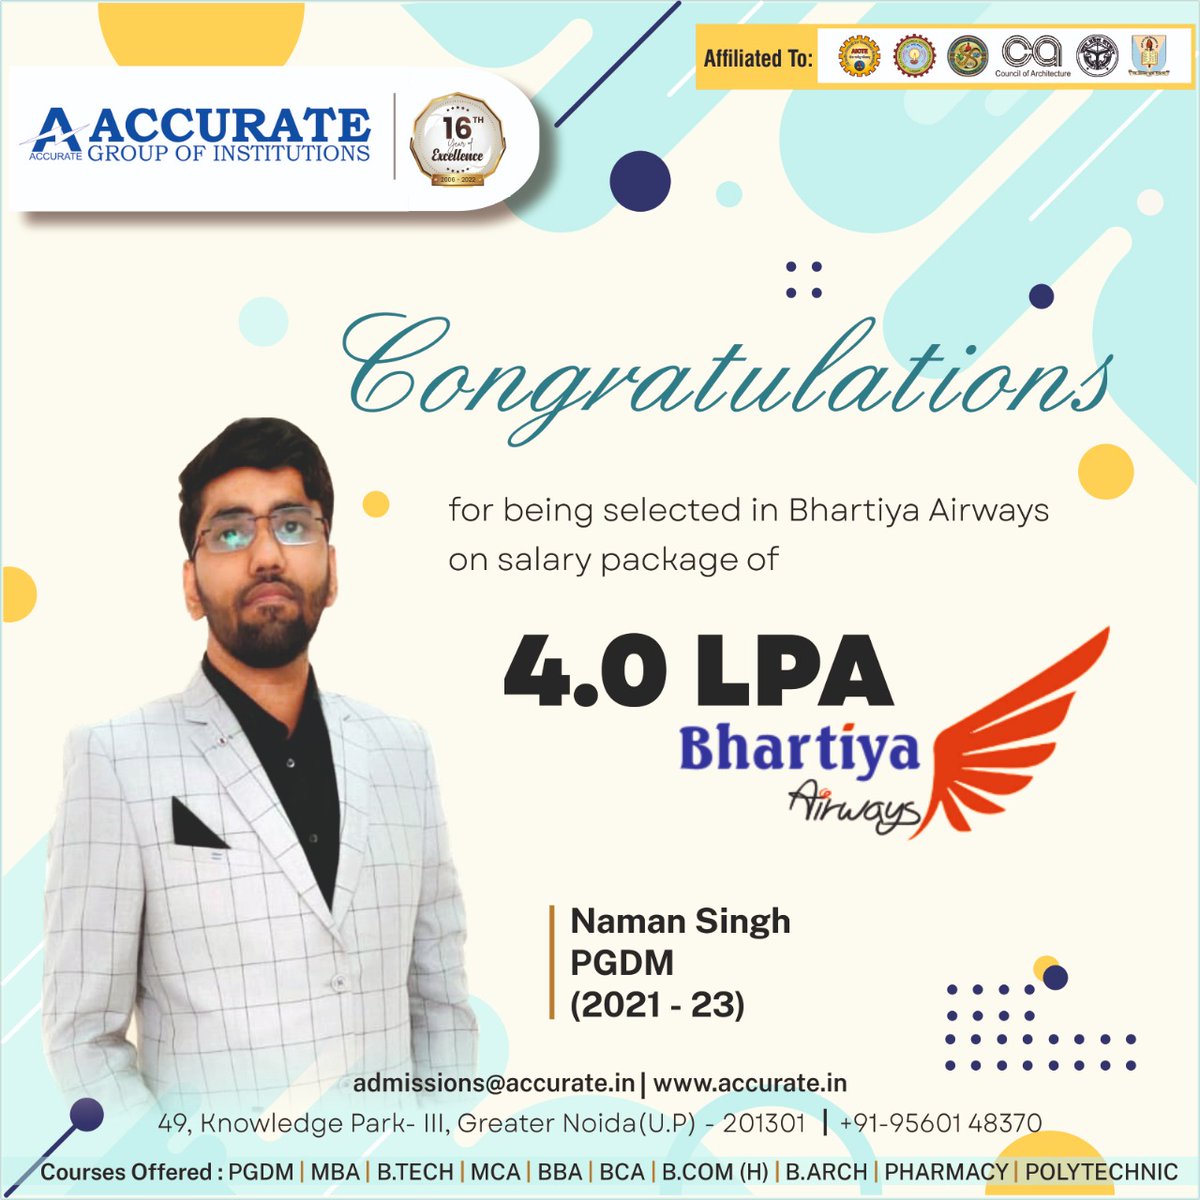 Naman Singh from PGDM (Batch 2021-2023) Has Been Selected by Bhartiya Airways with Salary Package of 4.00 Lacs Per Annum.

Read More: accurate.in/recent-placeme…
Call or WhatsApp: 9560148370

#Accurate #AccurateInstitute #GreaterNoida #RecentPlacement #PGDM #BhartiyaAirways